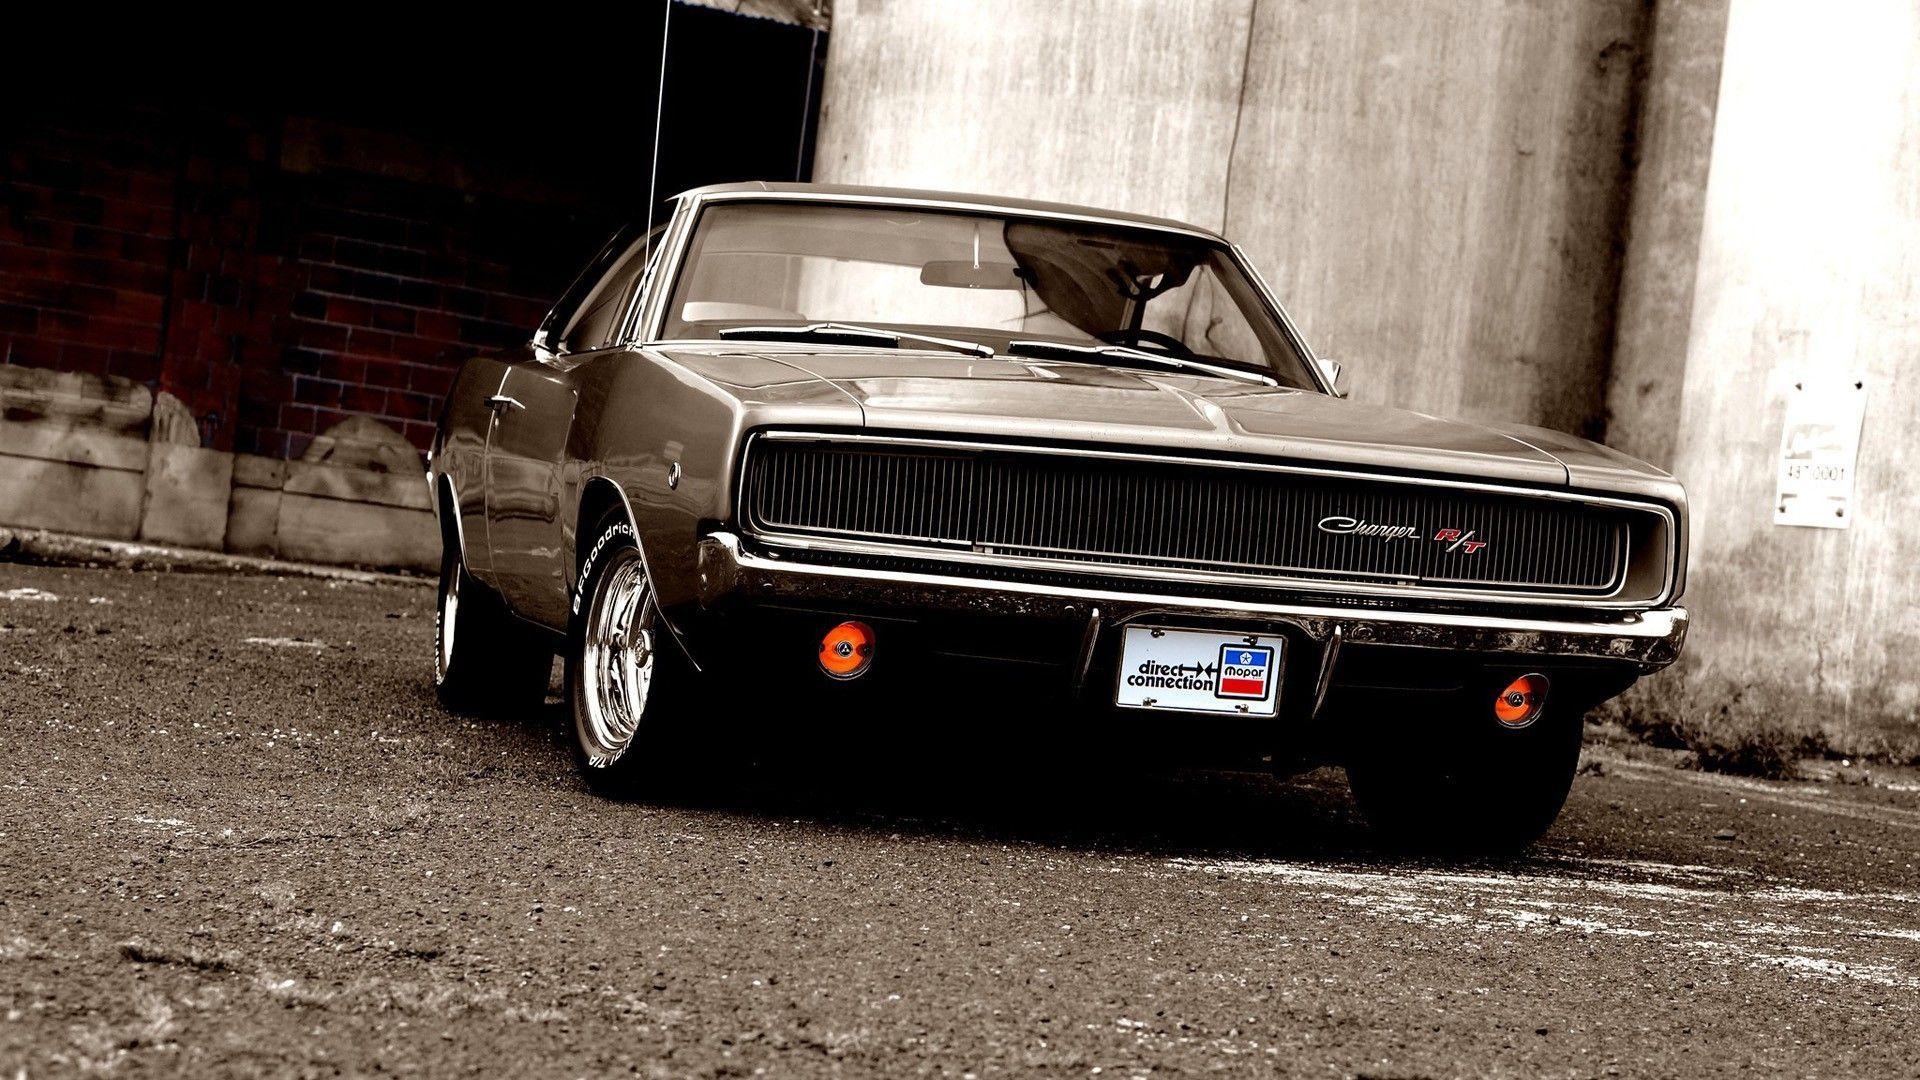 Dodge Charger Rt Wallpaper 1920x1080 for iPad Pro. Garage